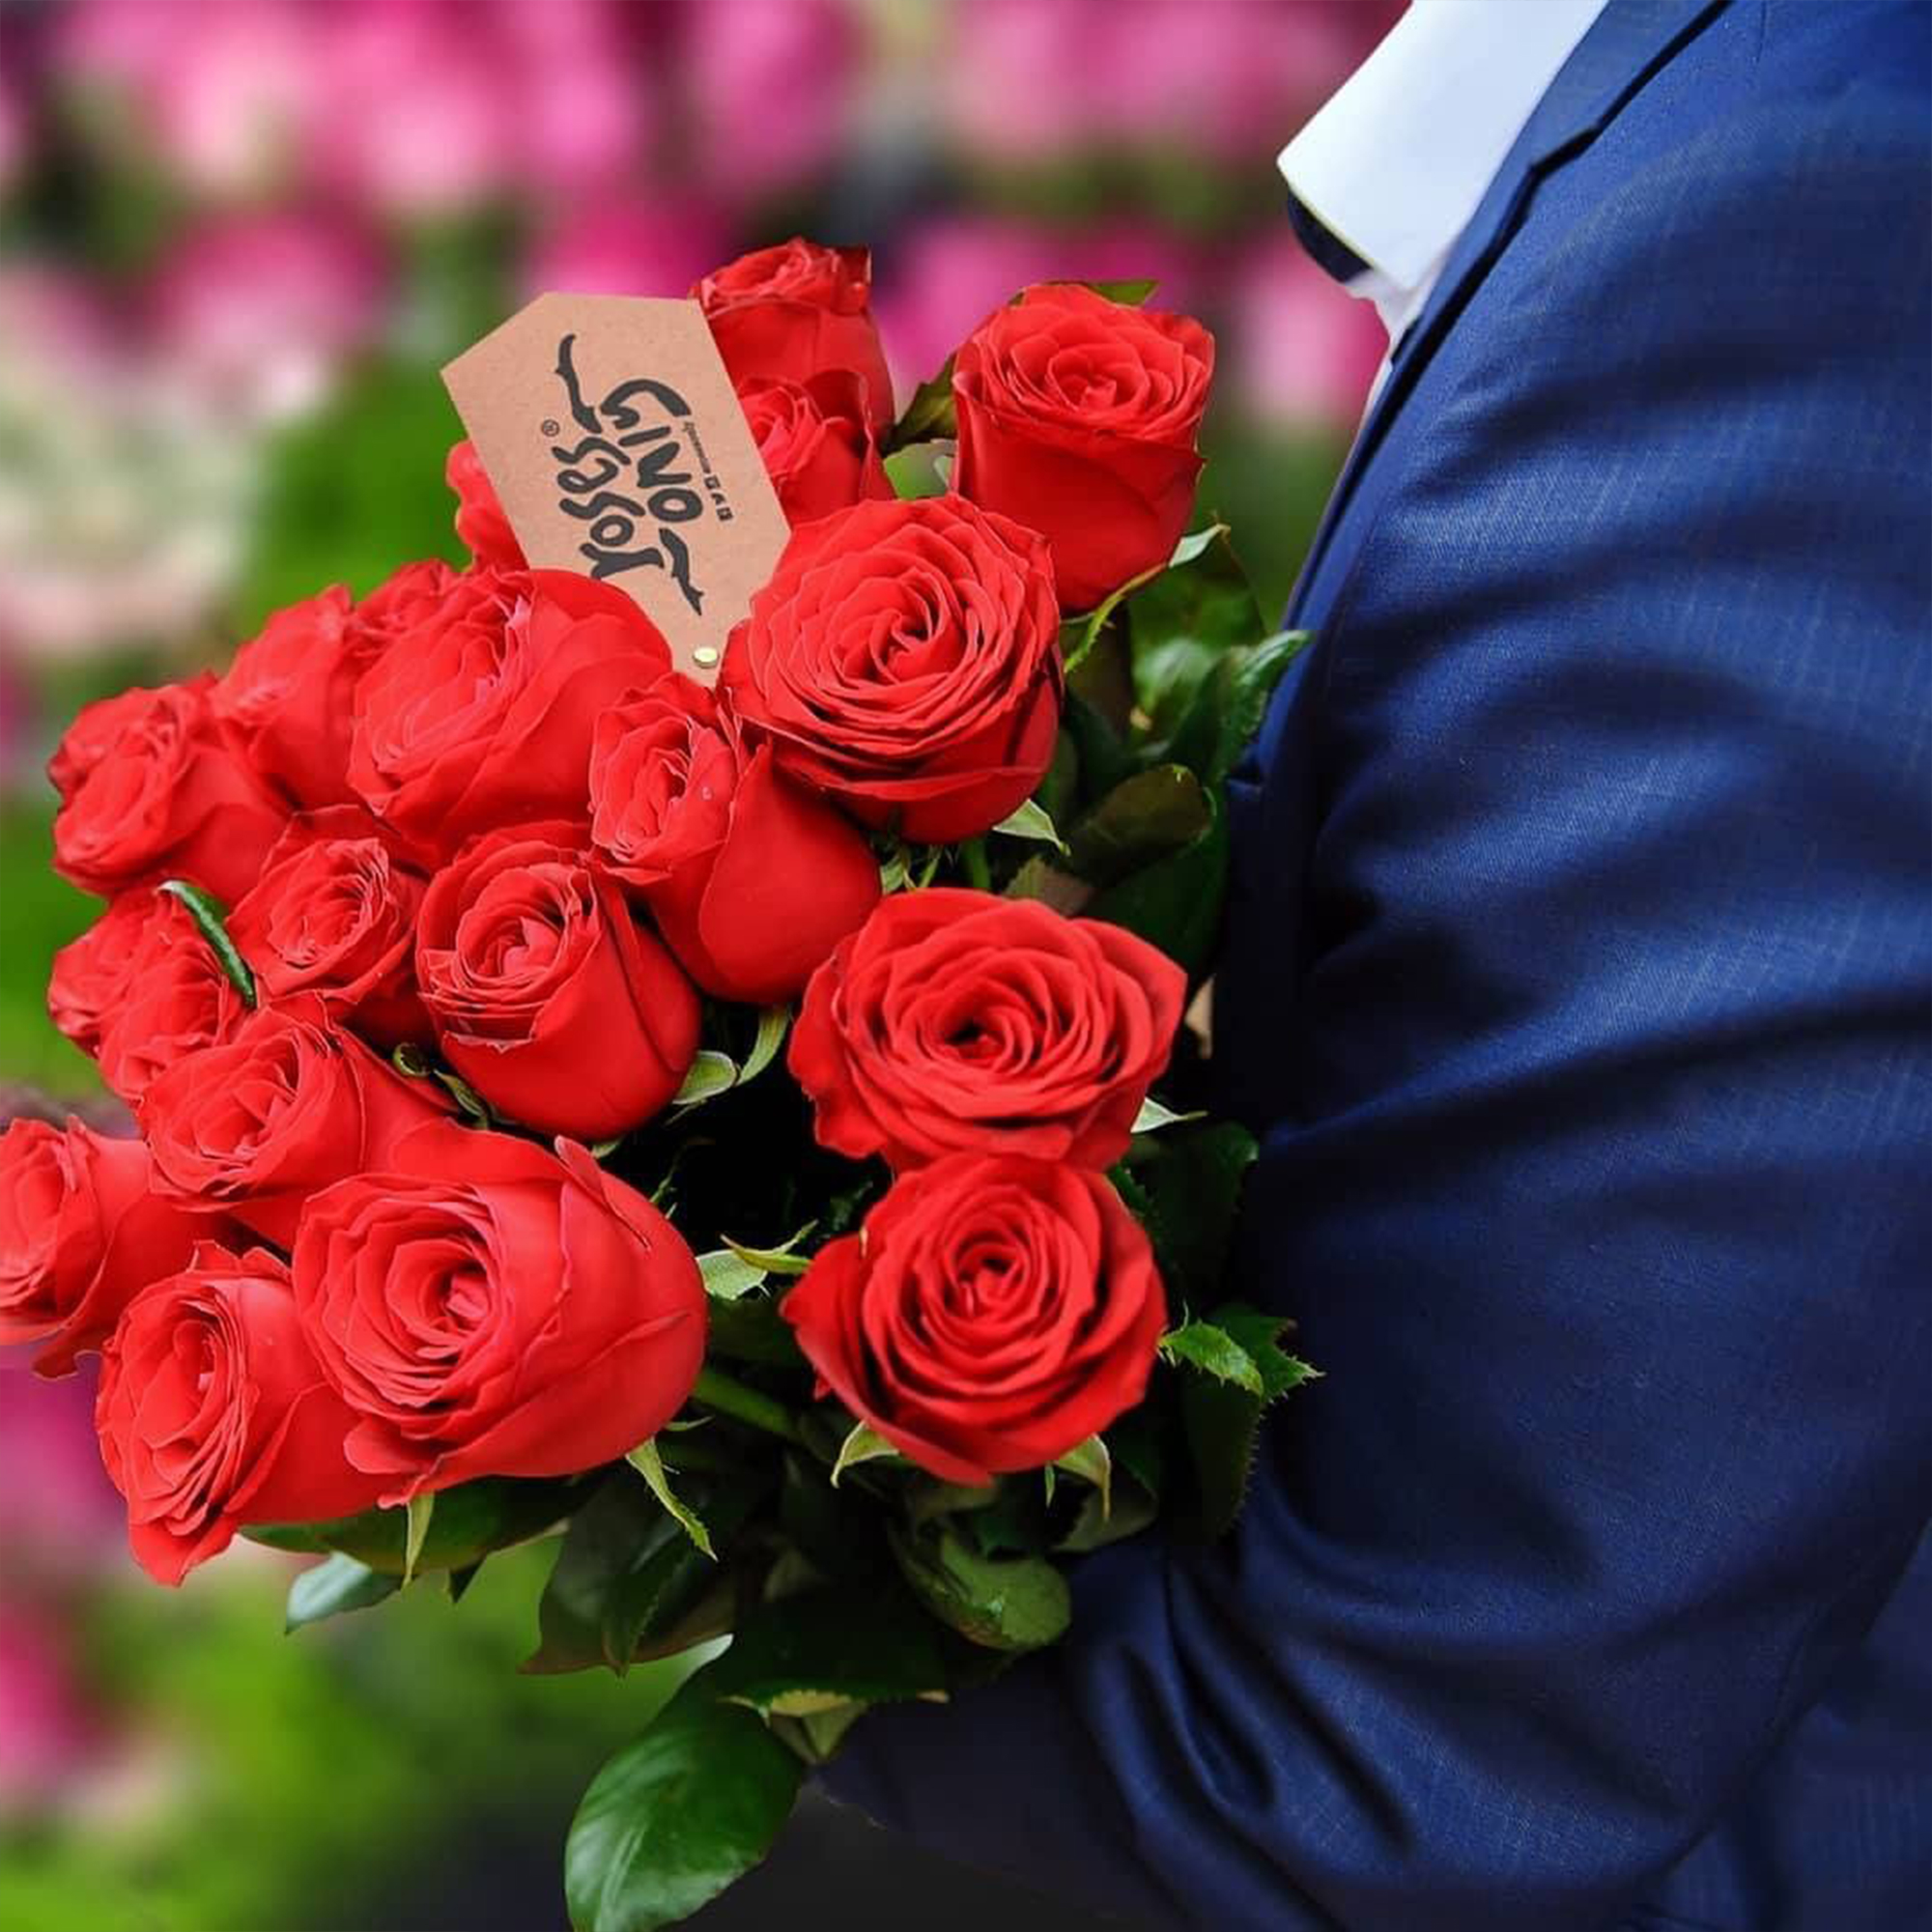 How To Buy The Best Valentine's Day Flowers